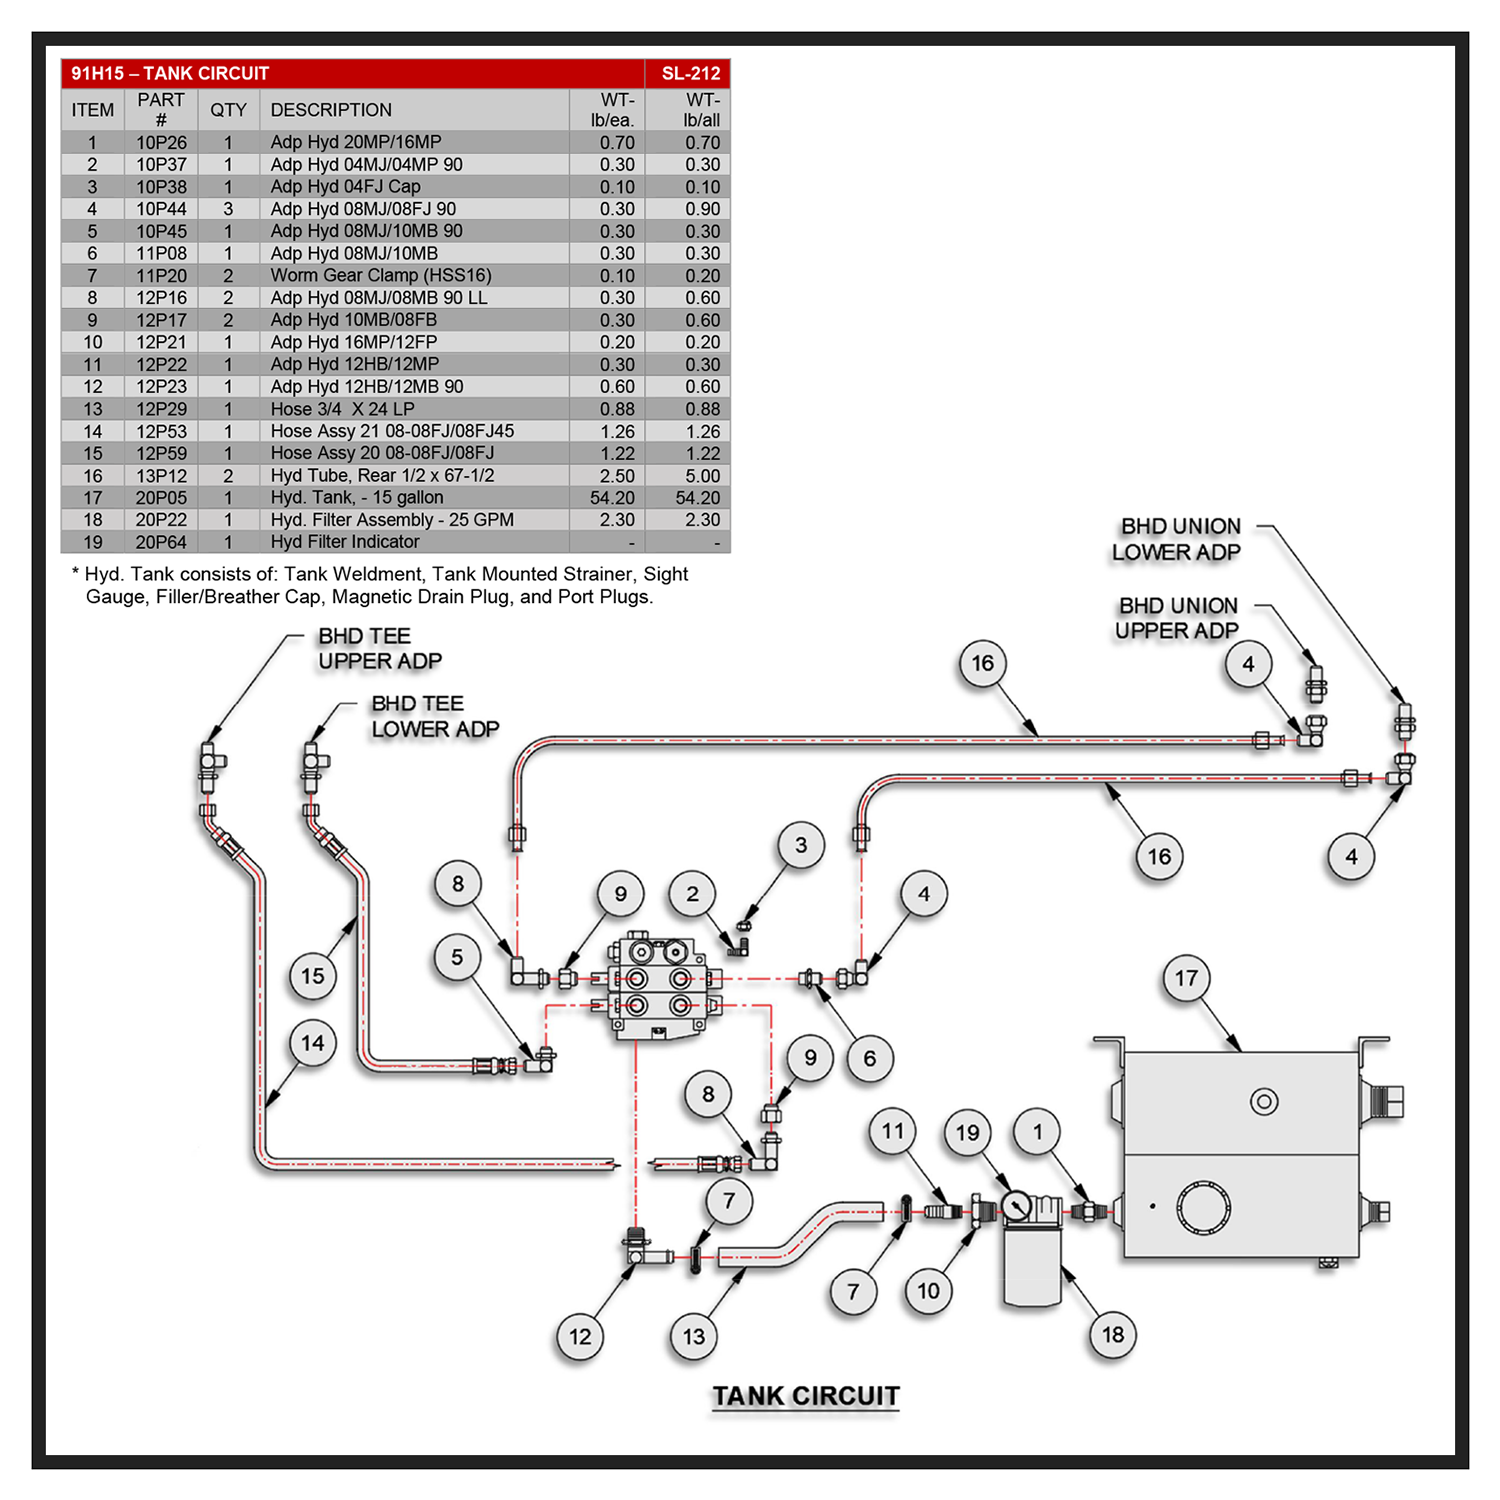 Swaploader SL-185/212 Hydraulic Sub-Assembly Chassis Tank Circuit Diagram